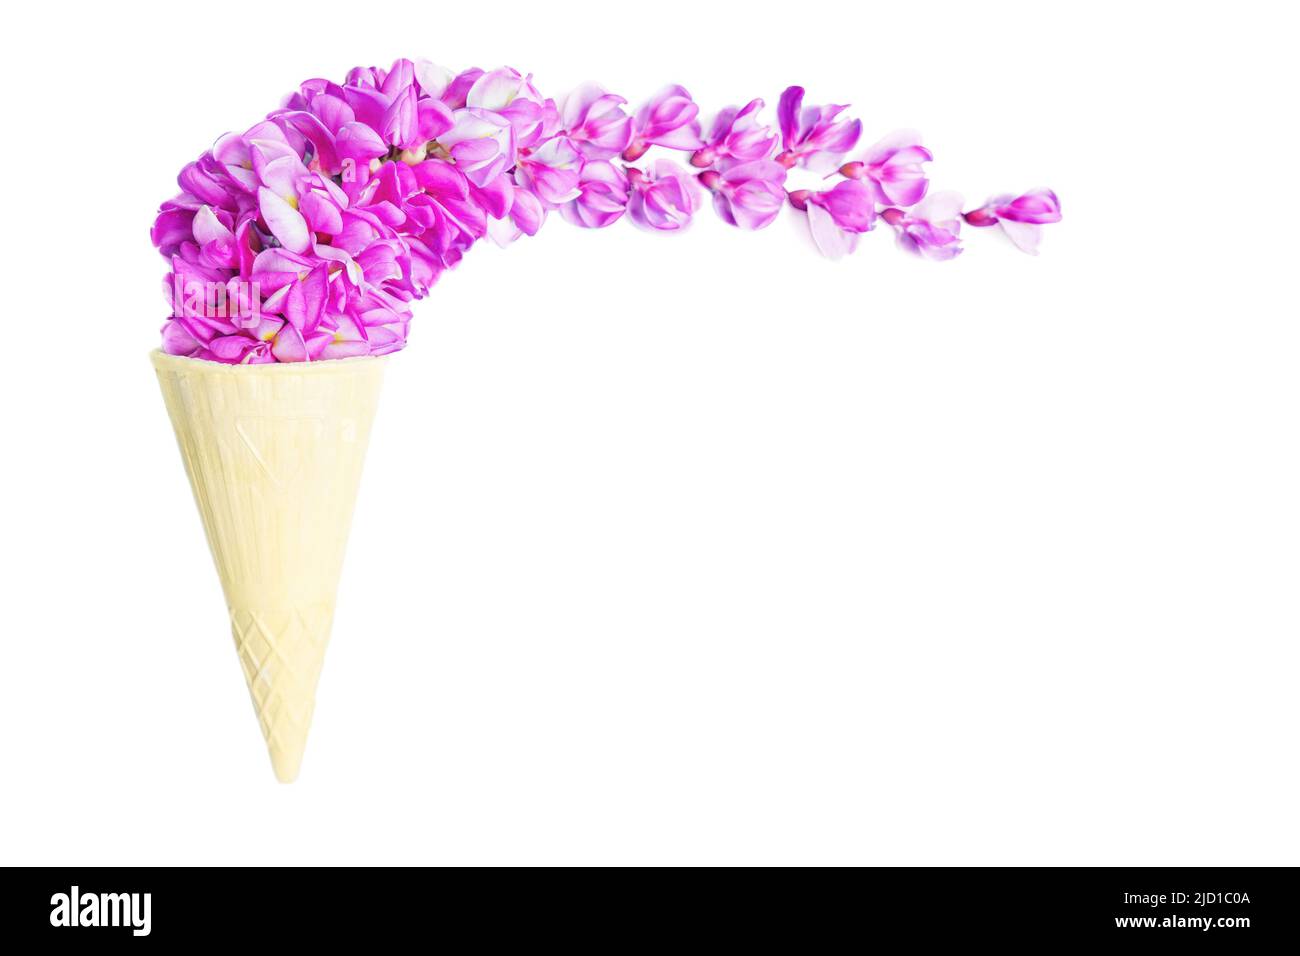 Ice cream shape made from violet acacia flowers and a waffle cone isolated on white background. Vivid style refreshment concept. Stock Photo